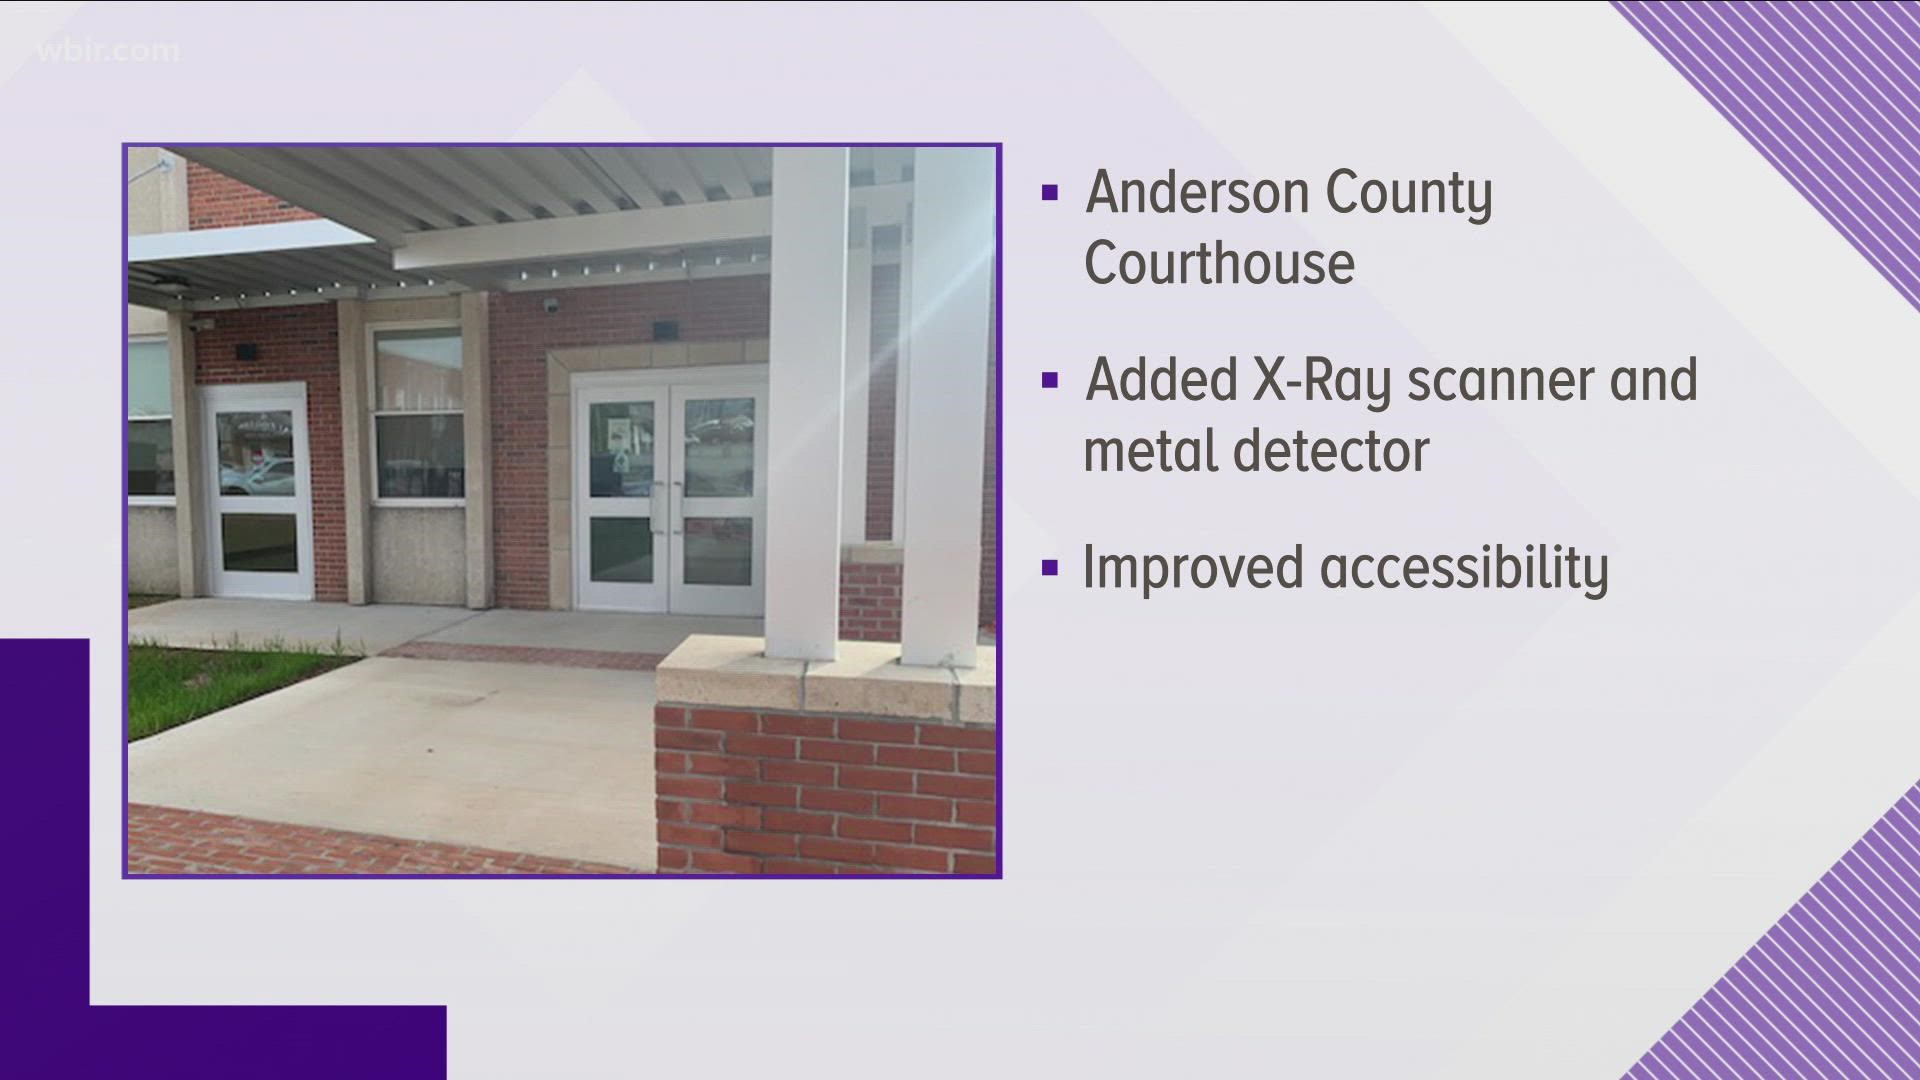 New security at the Anderson County courthouse means there will be only one entrance to the building.